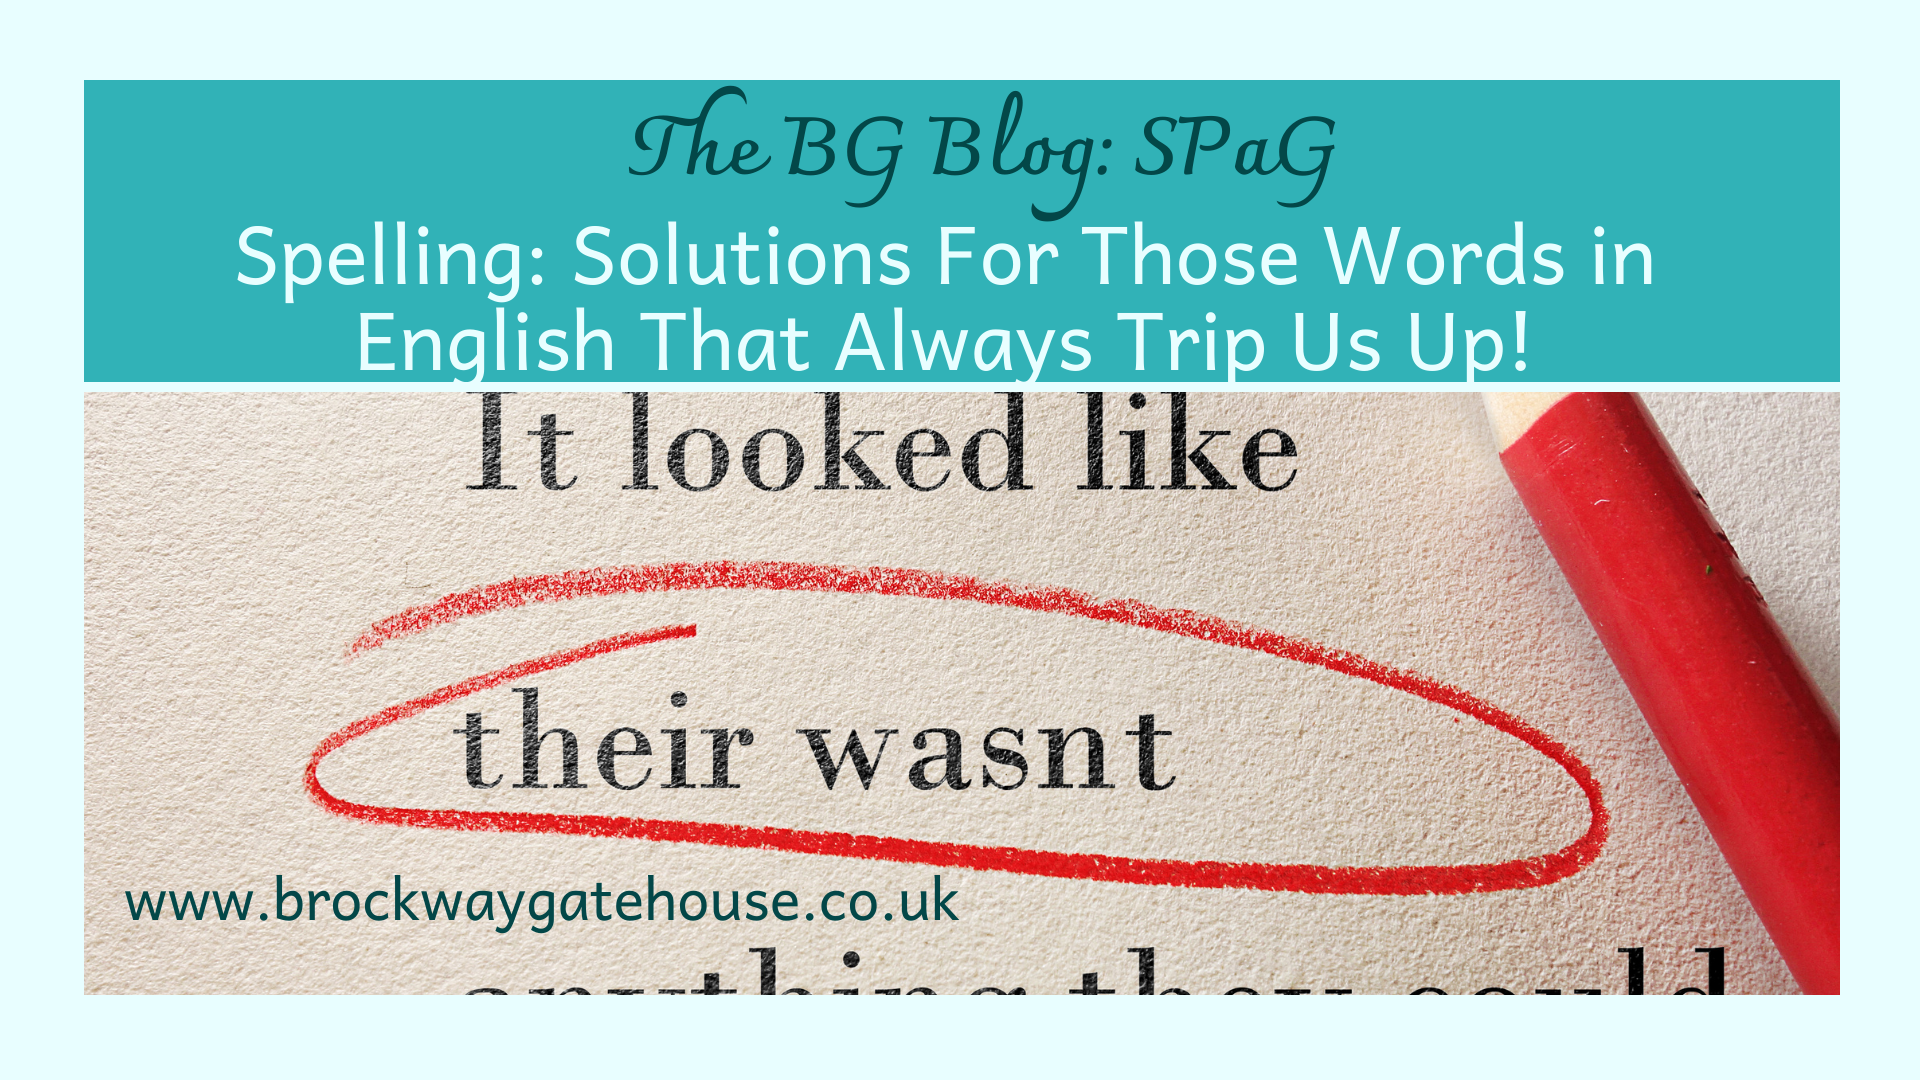 SPaG: Spelling – Solutions For Those Words in English That Always Trip Us Up!